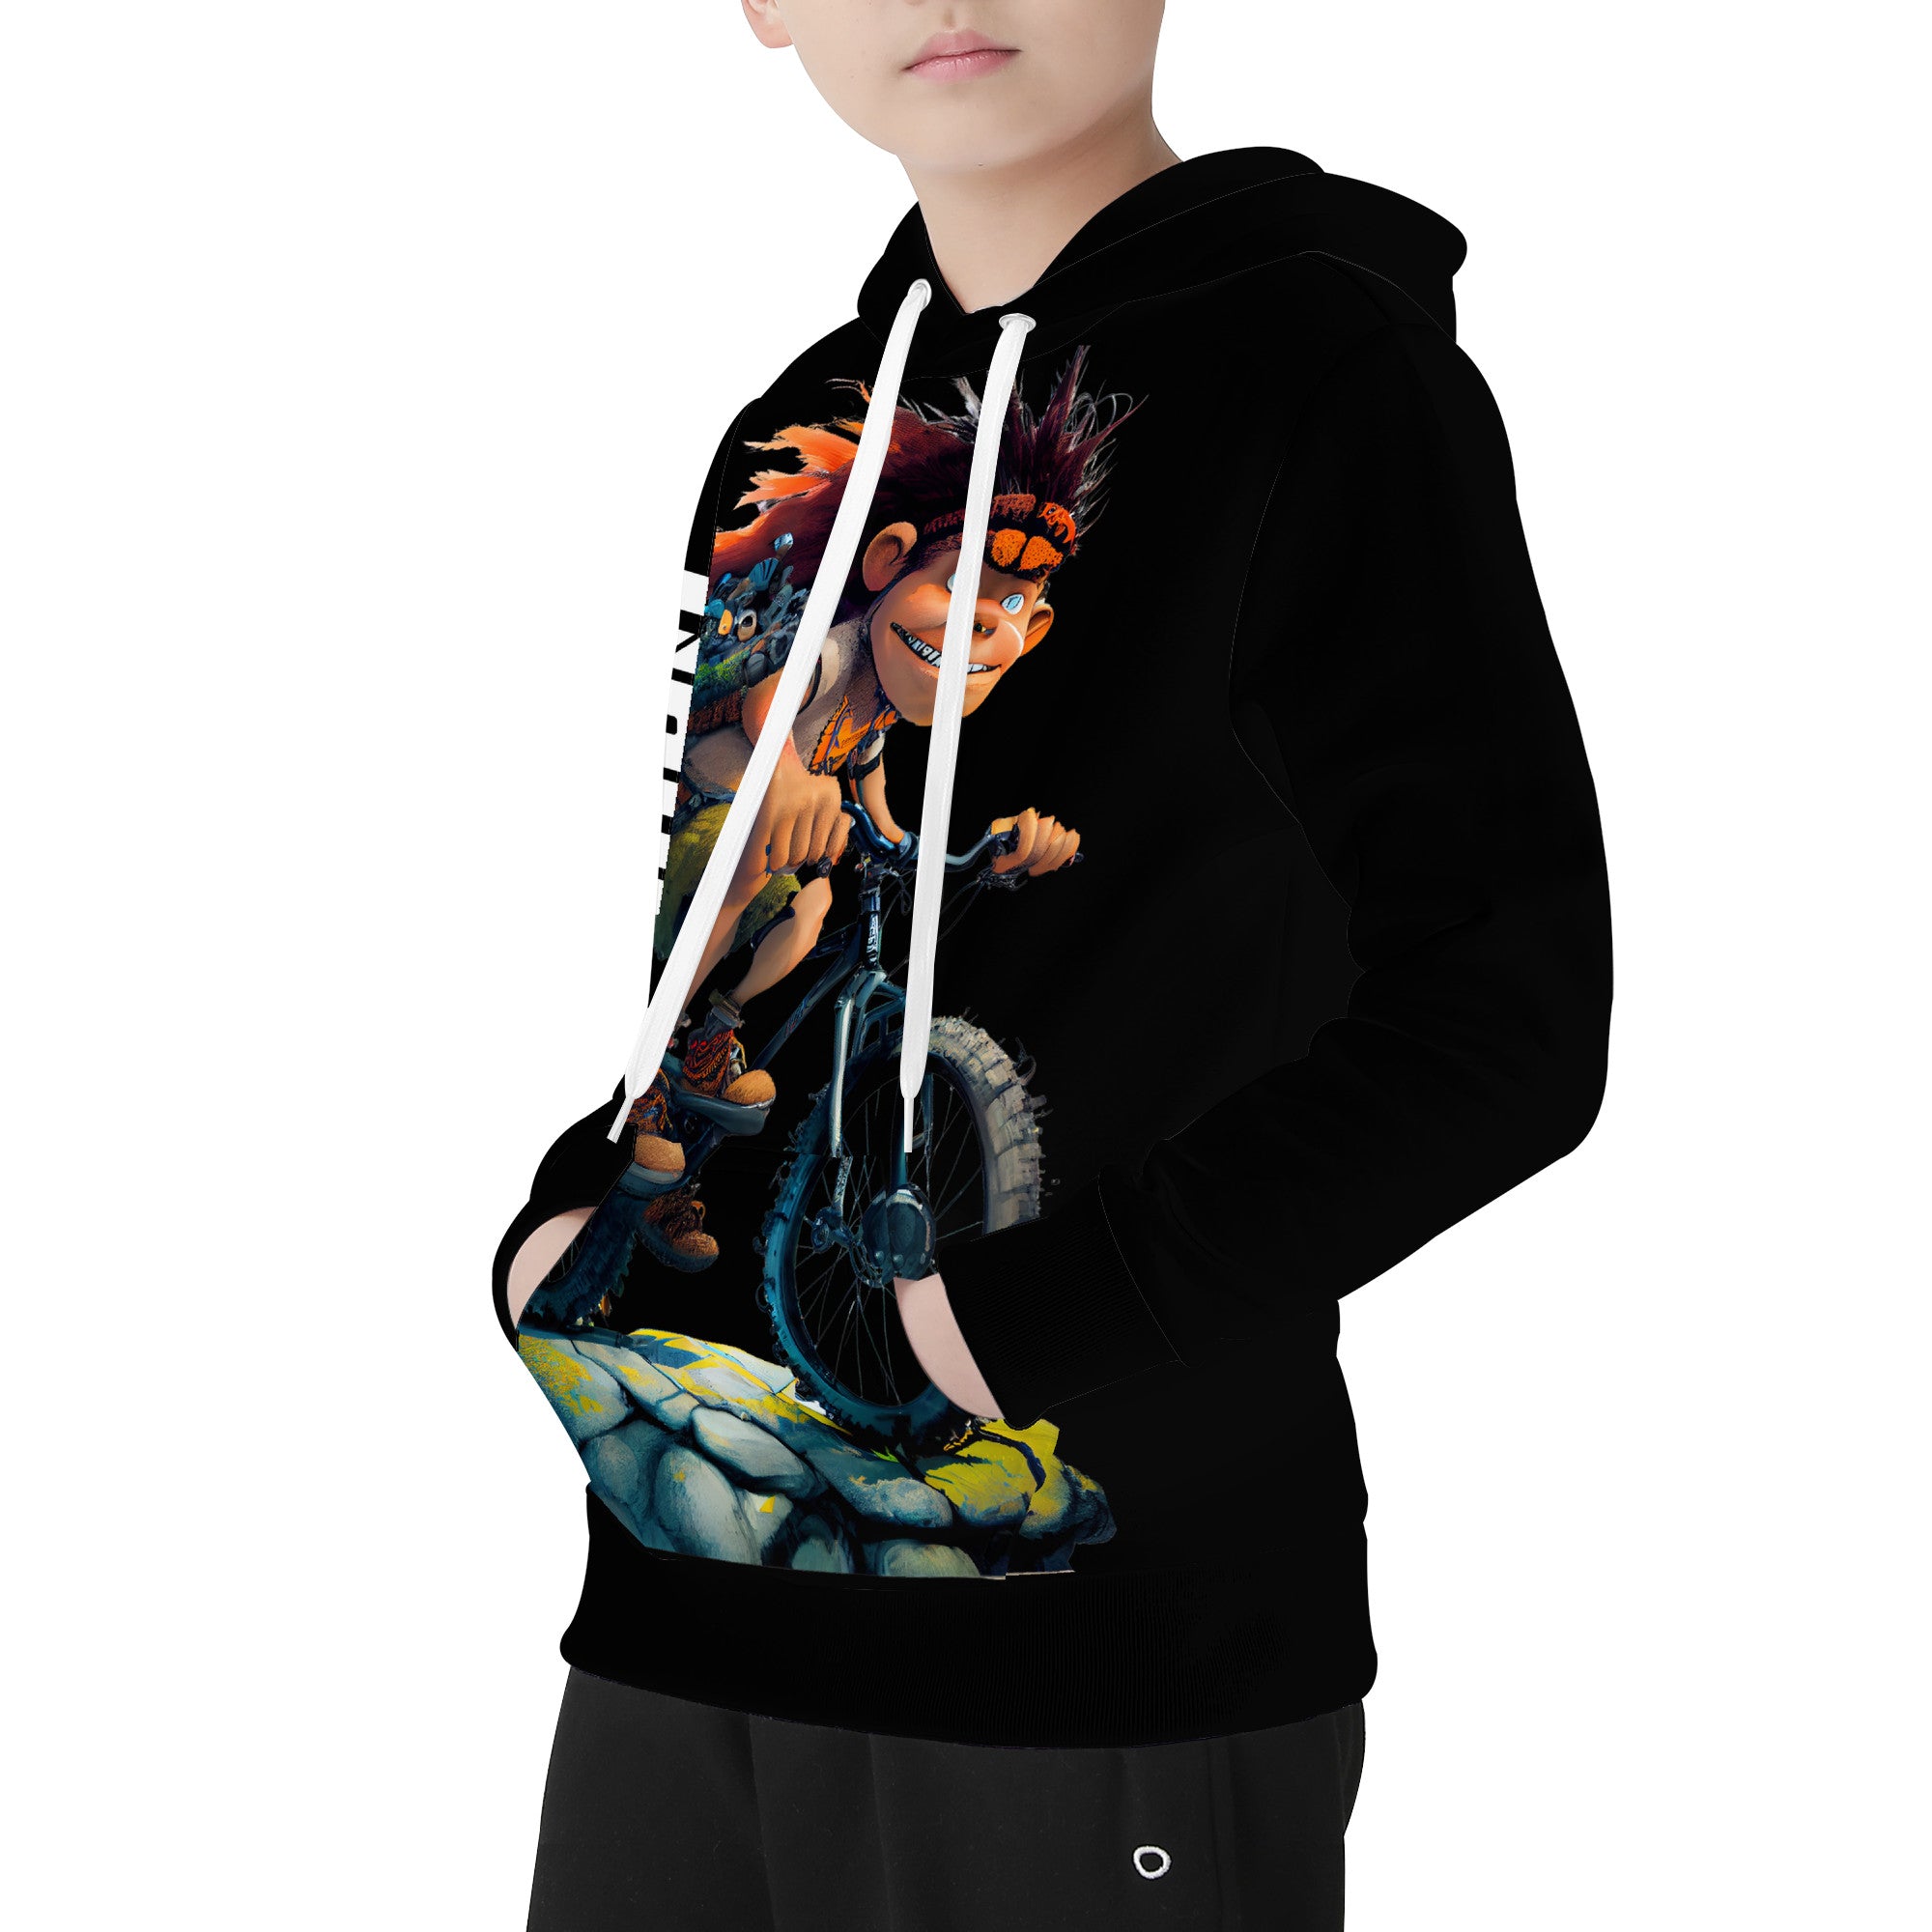 SF_F5 Youth's All Over Print Hoodie